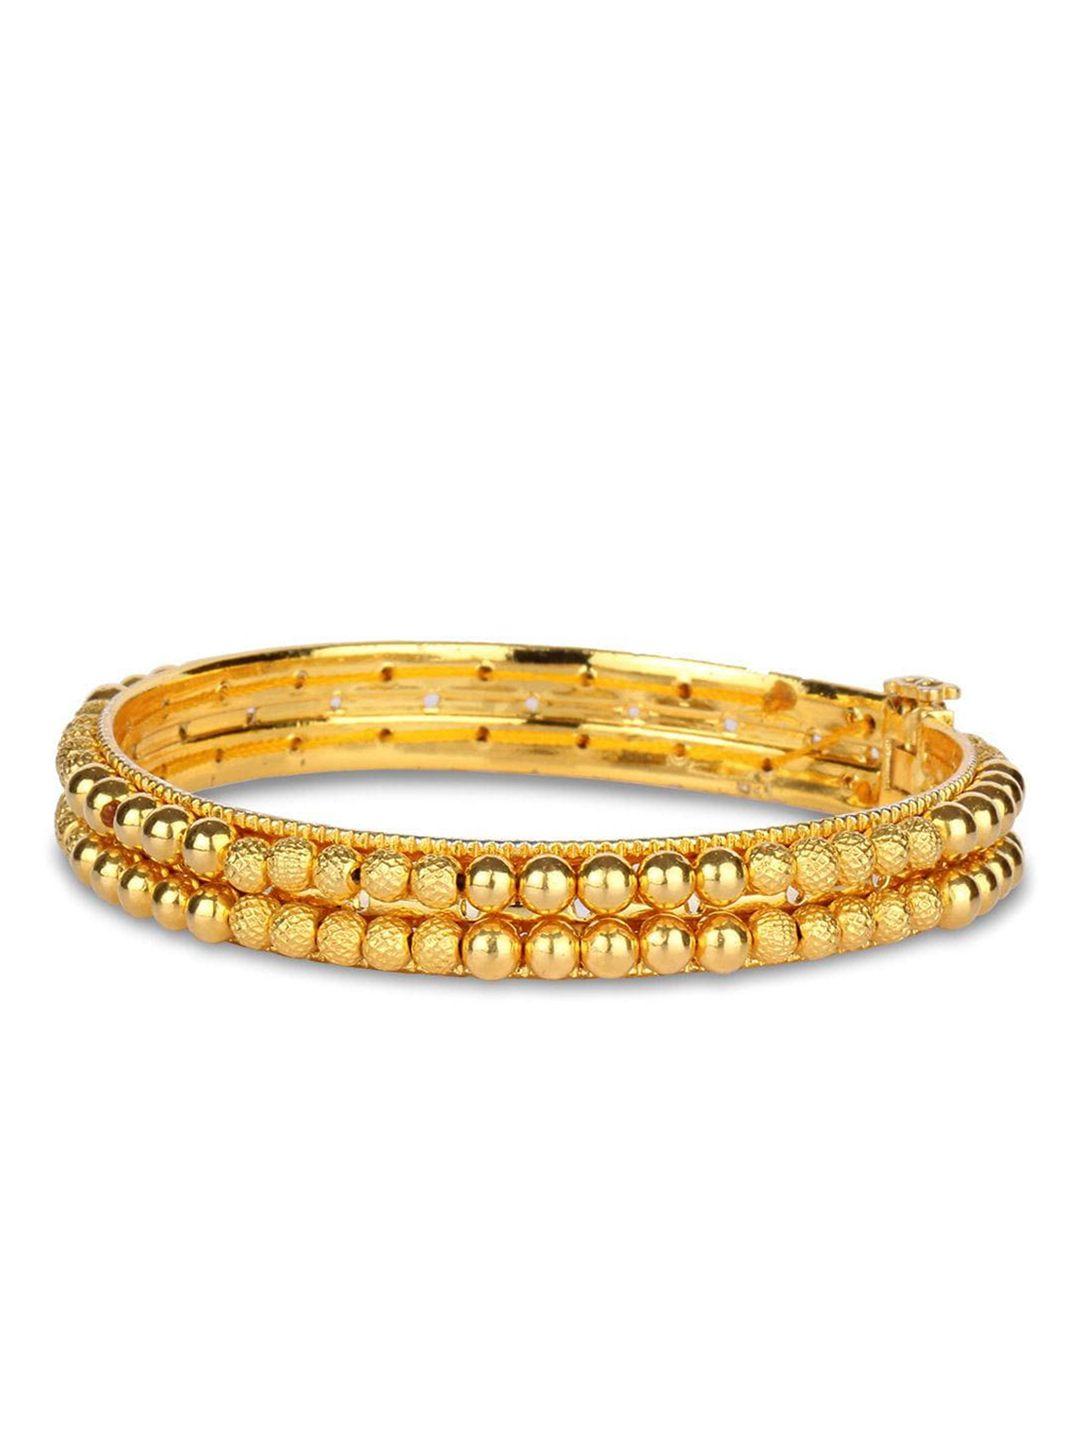 candere a kalyan jewellers company 22kt (916) gold traditional tushi bangle- 2.12gm